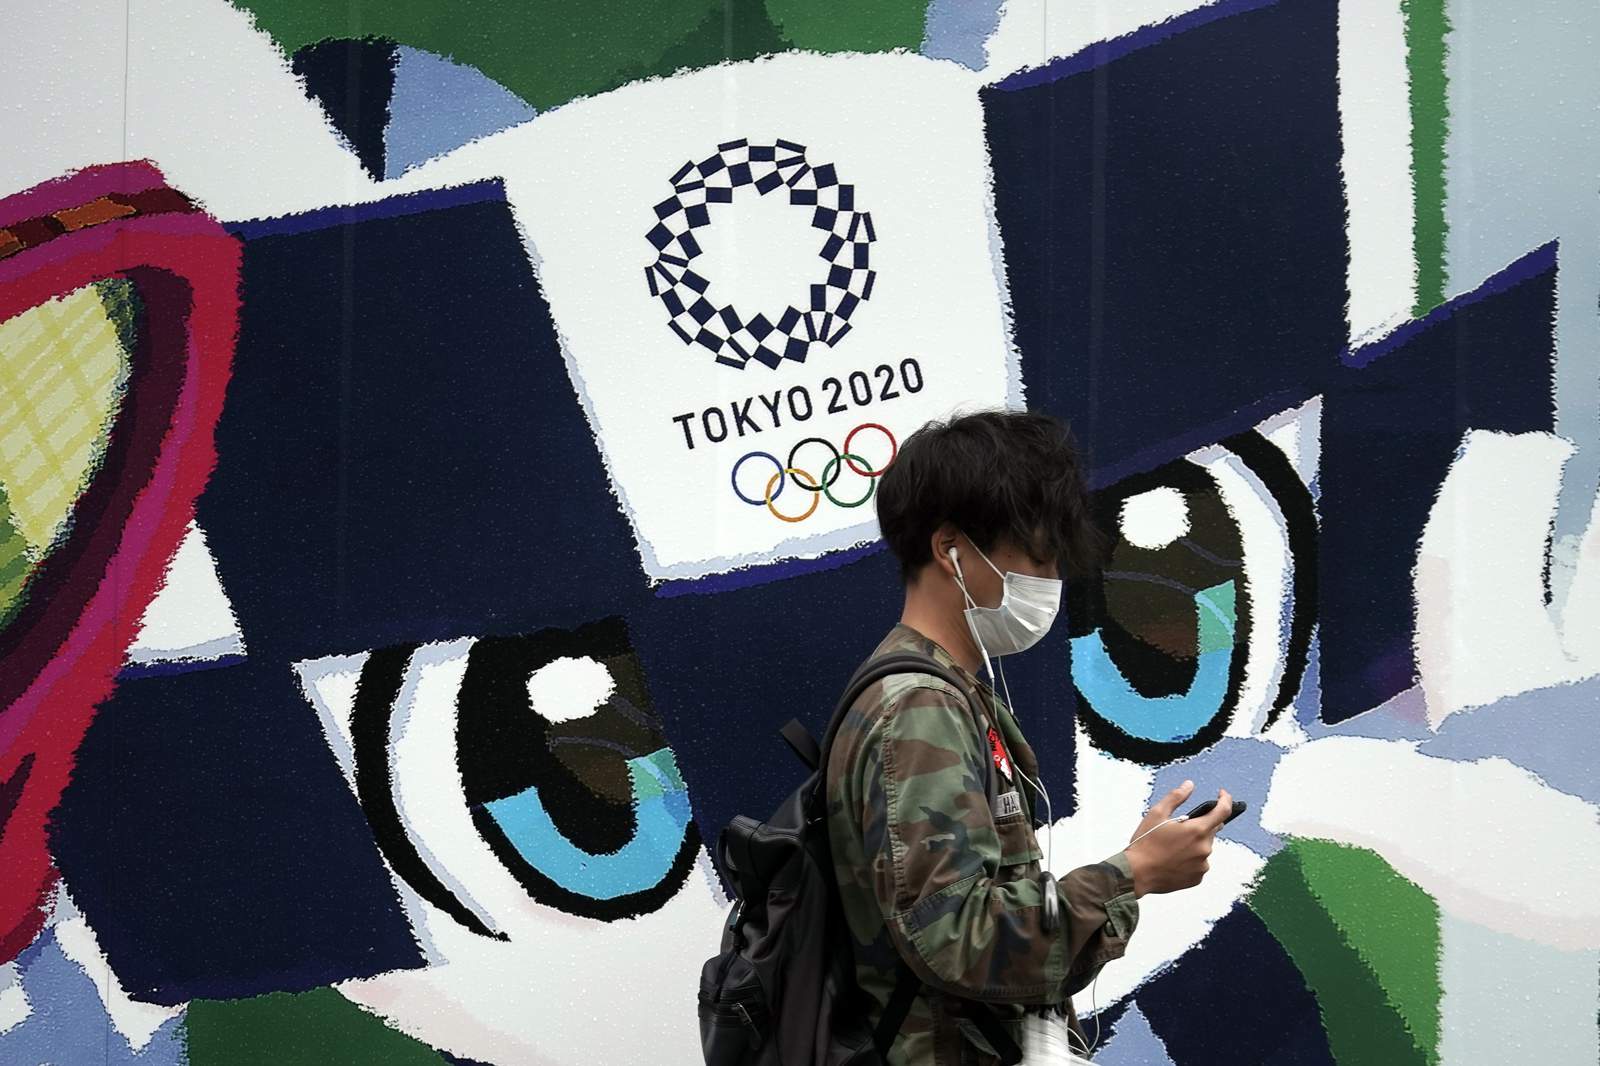 IOC gives assurance to sports bodies that Tokyo is on track